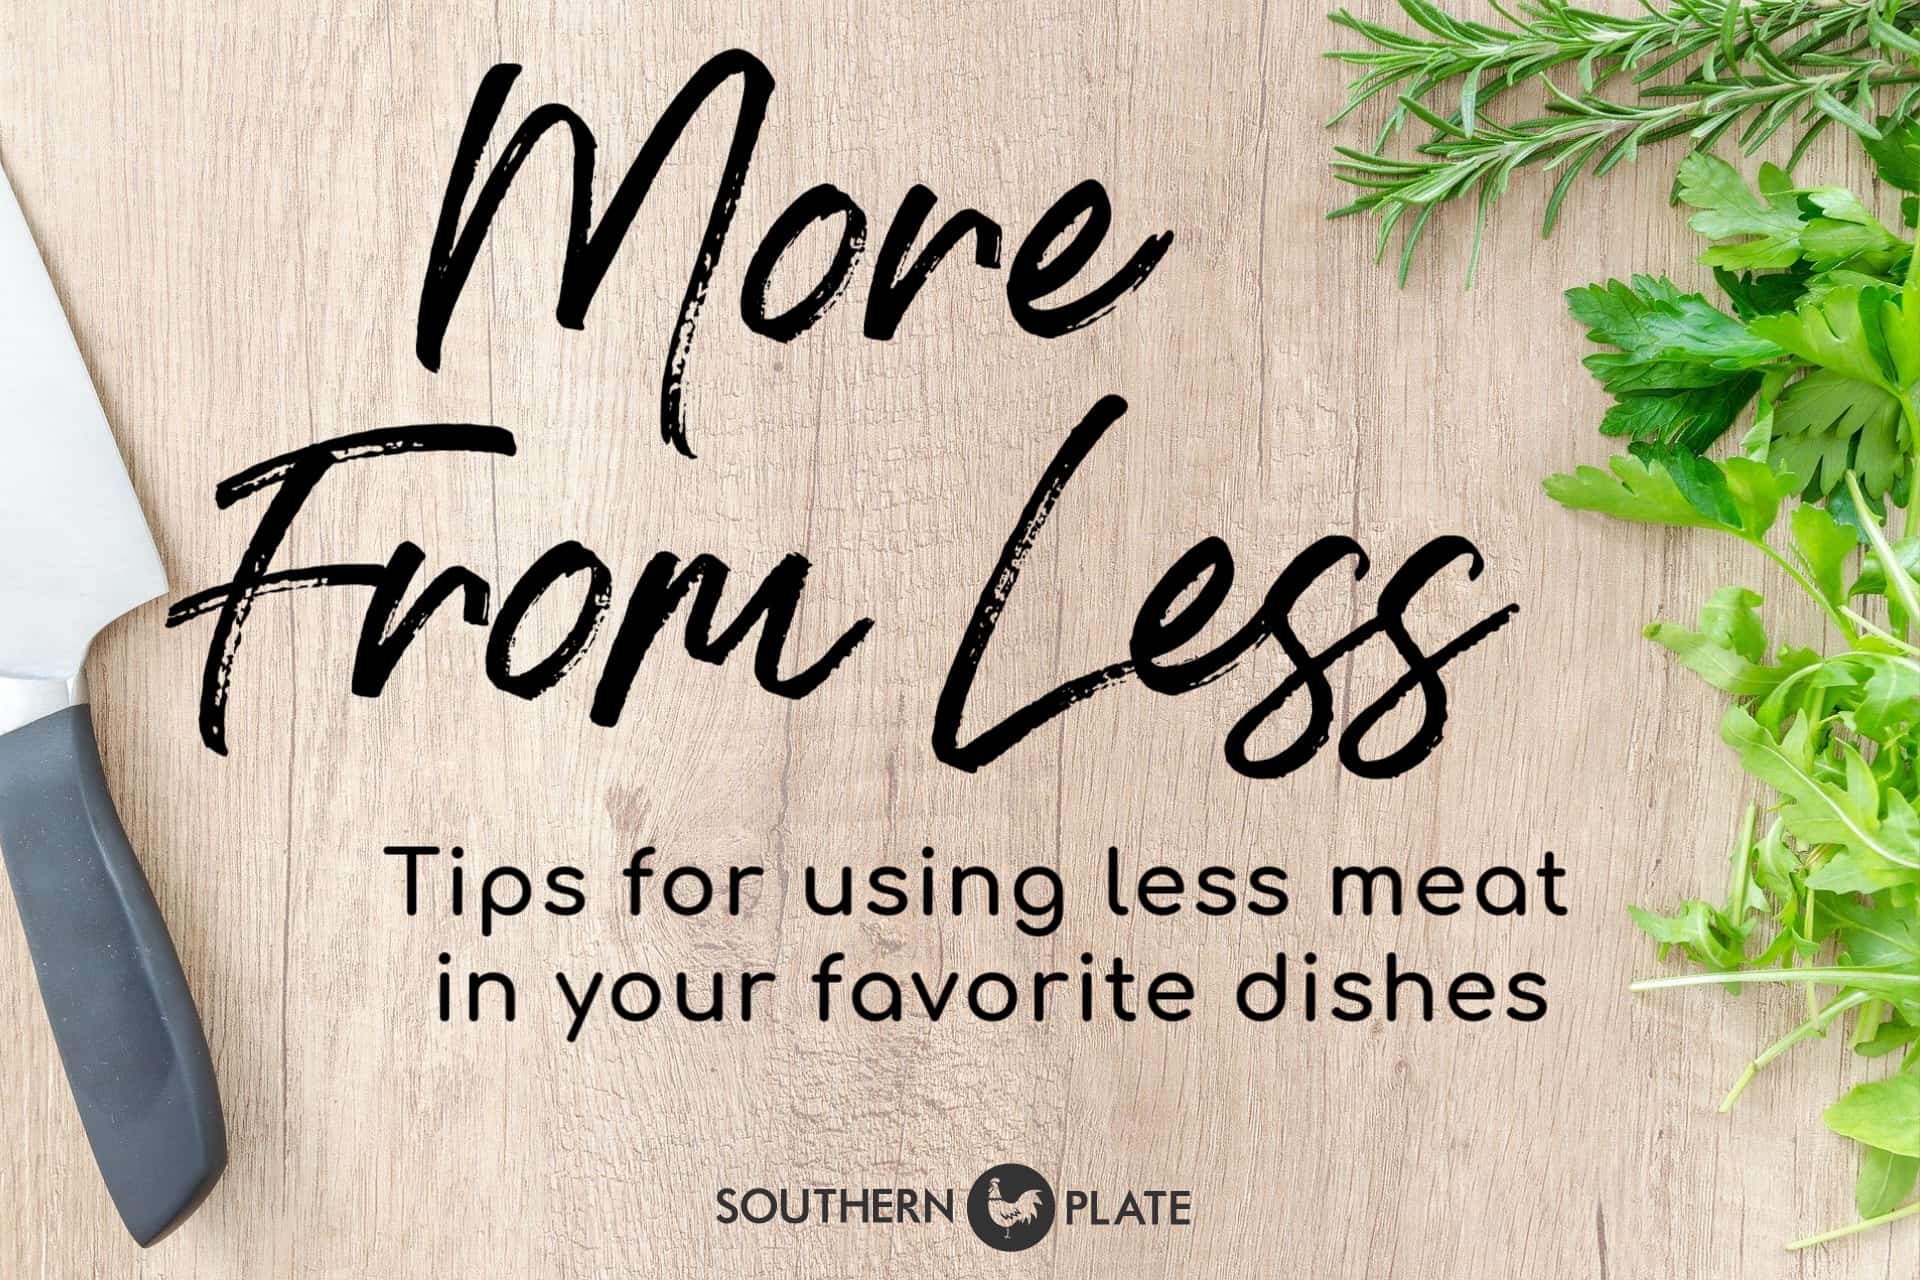 Less meat dishes